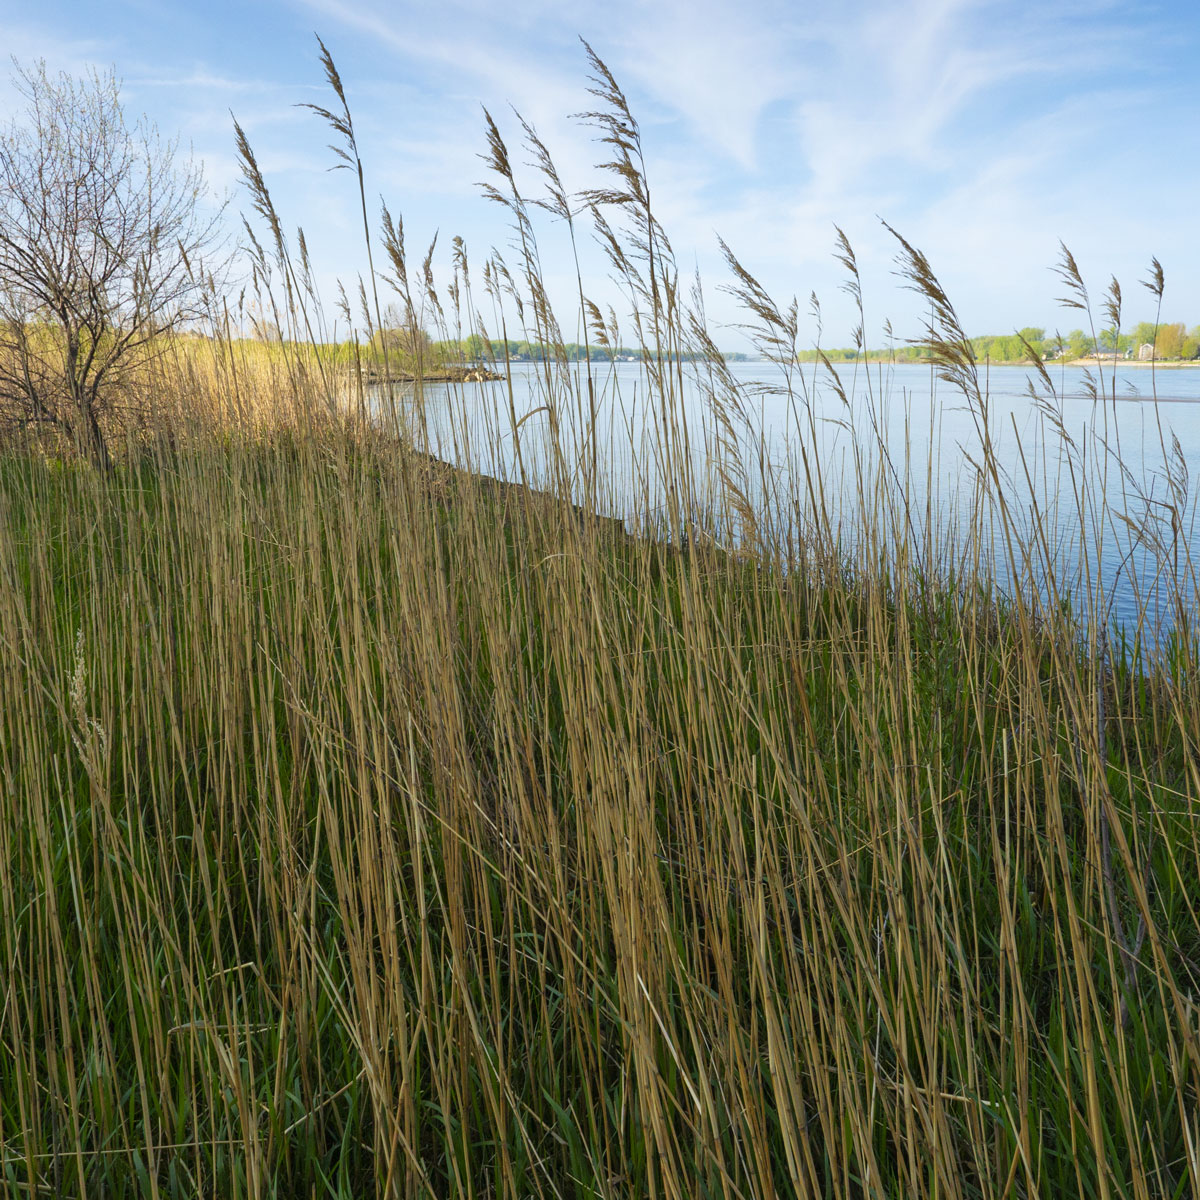 Golden reeds wave in a chill morning breeze among green grass on the banks of the Missouri River.